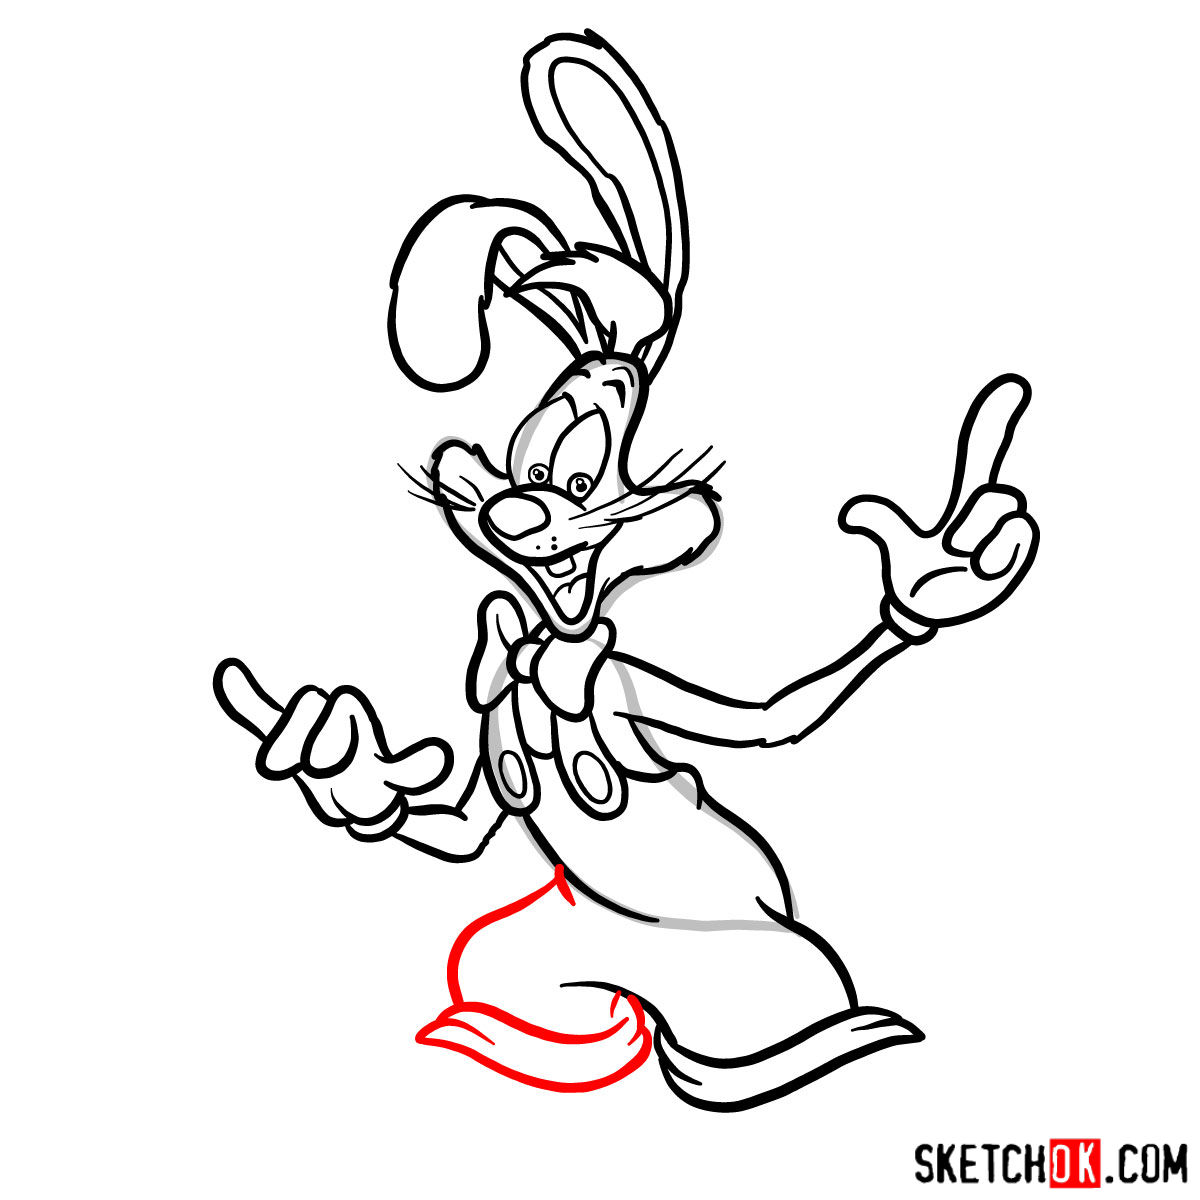 How to draw Roger Rabbit - step 12